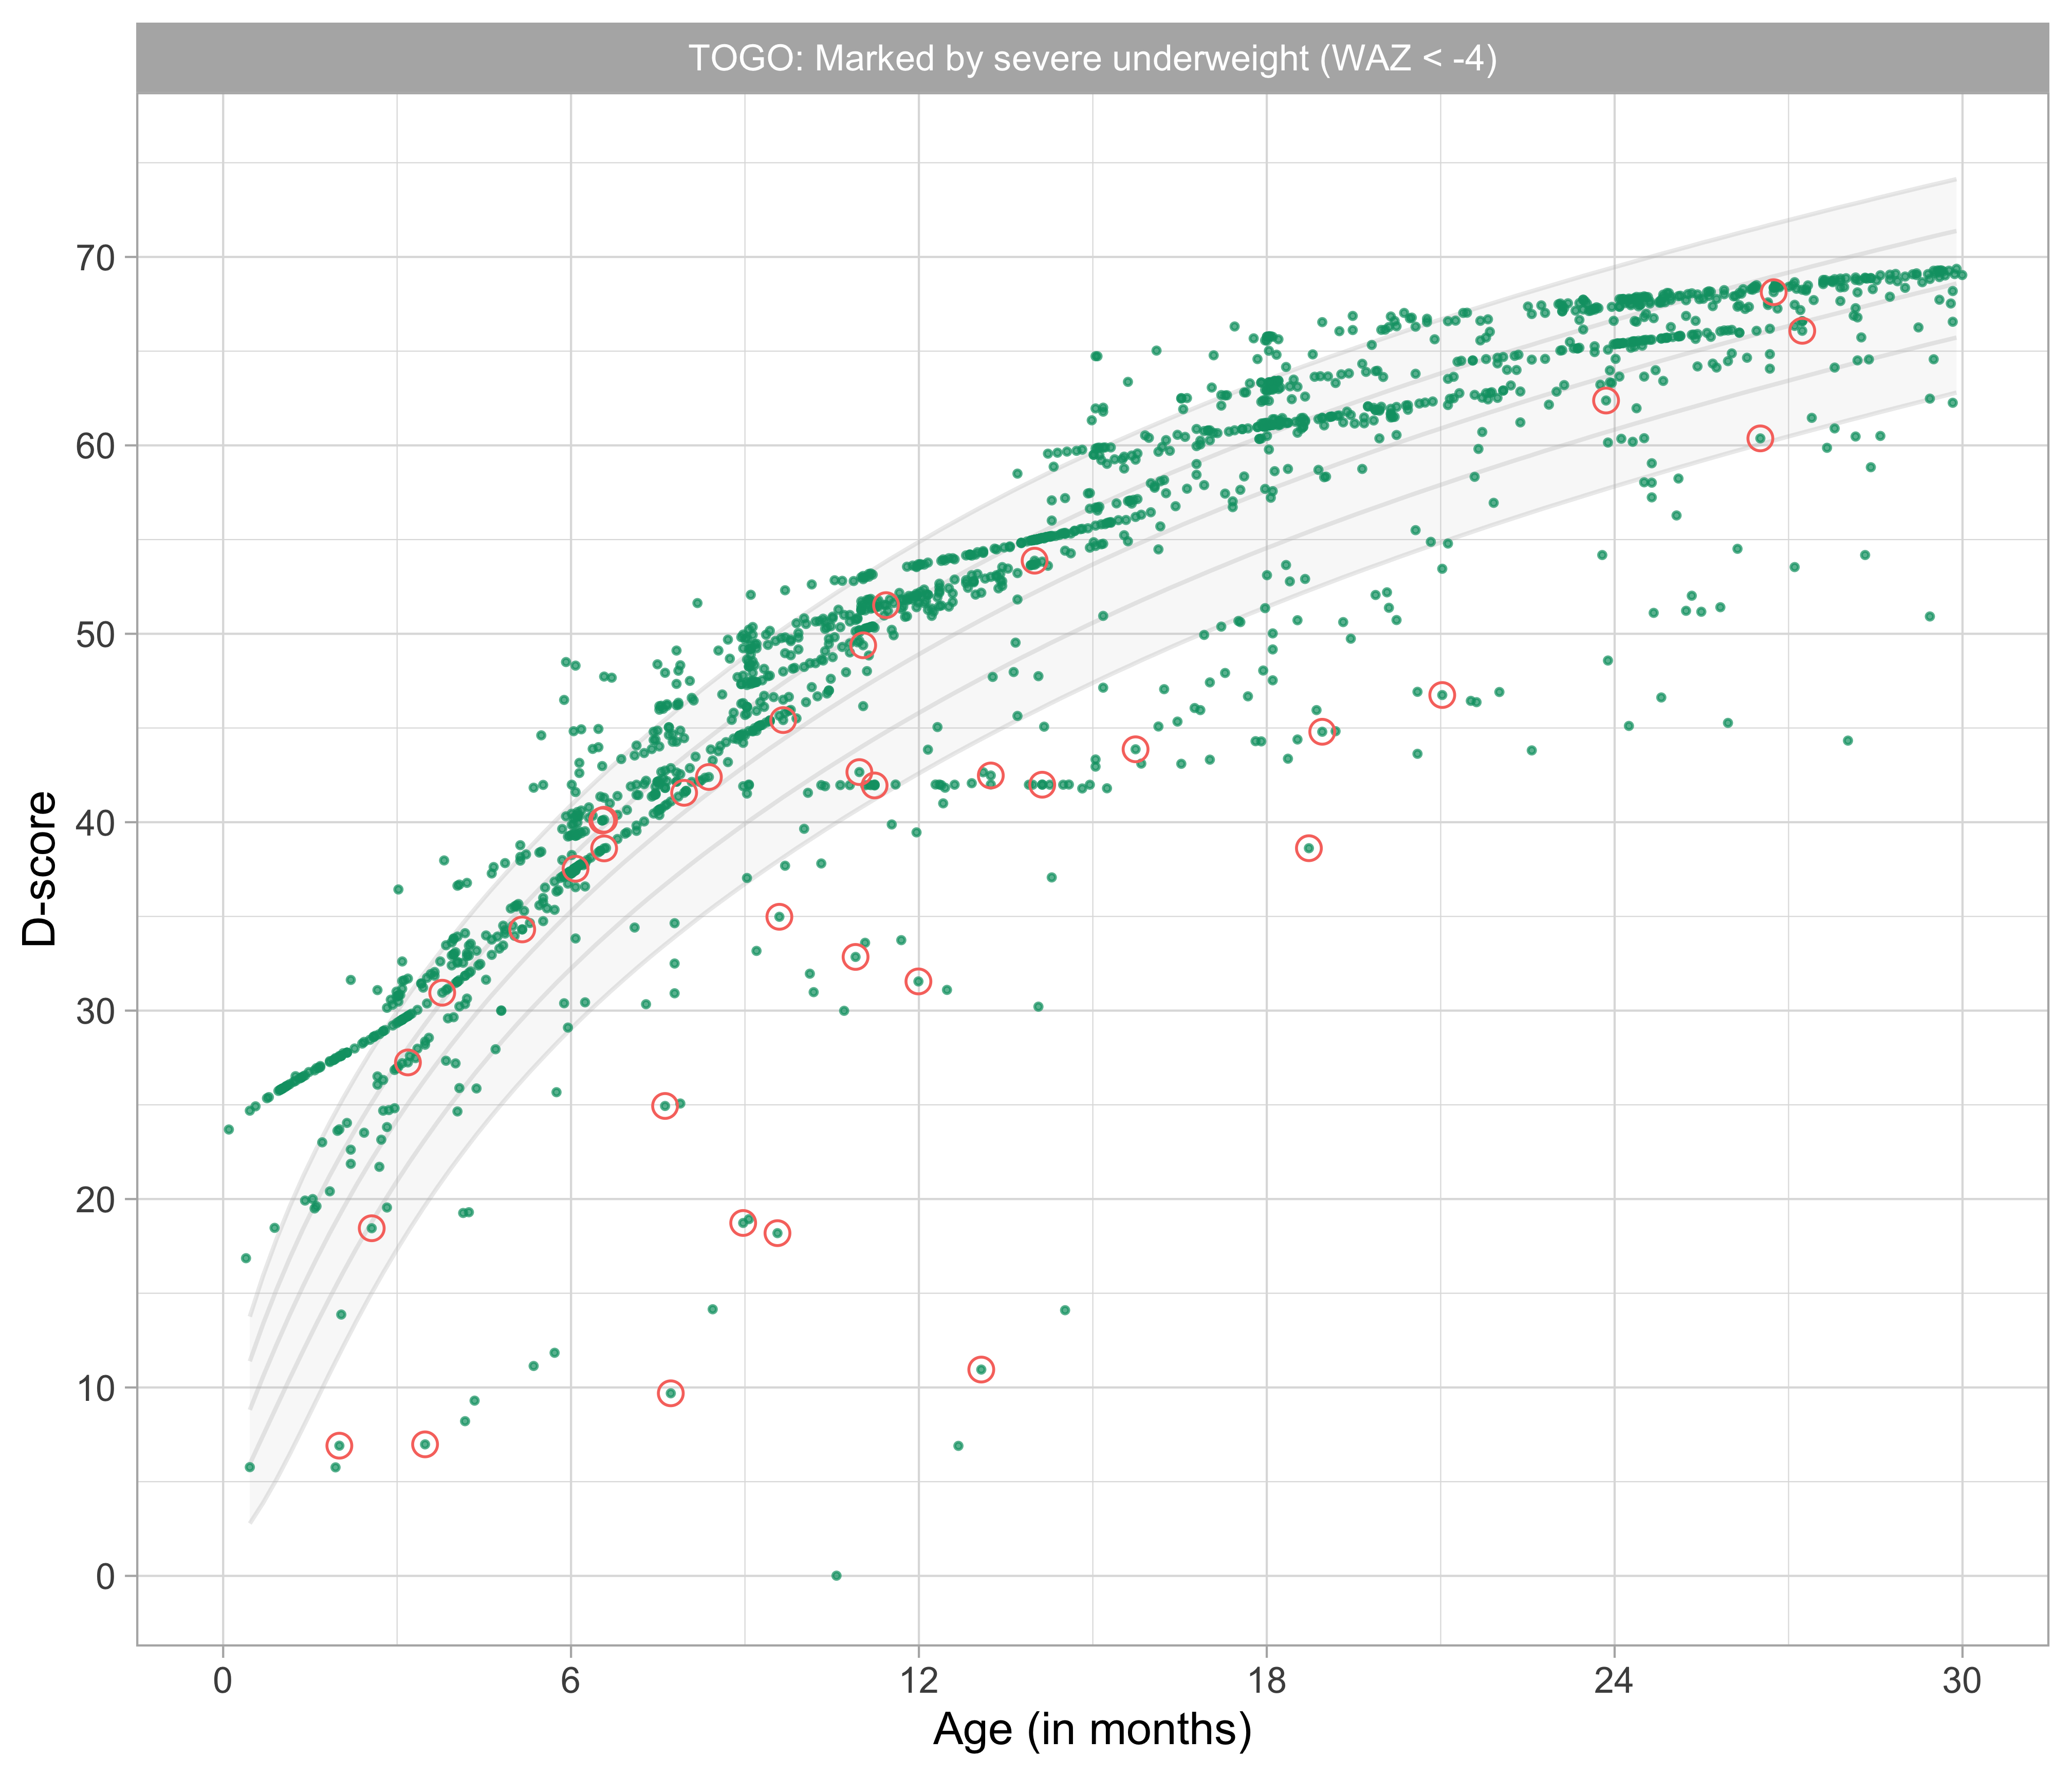 Distribution of D-score by age labelled by severe underweight (WAZ < -4) (Source: TOGO data).